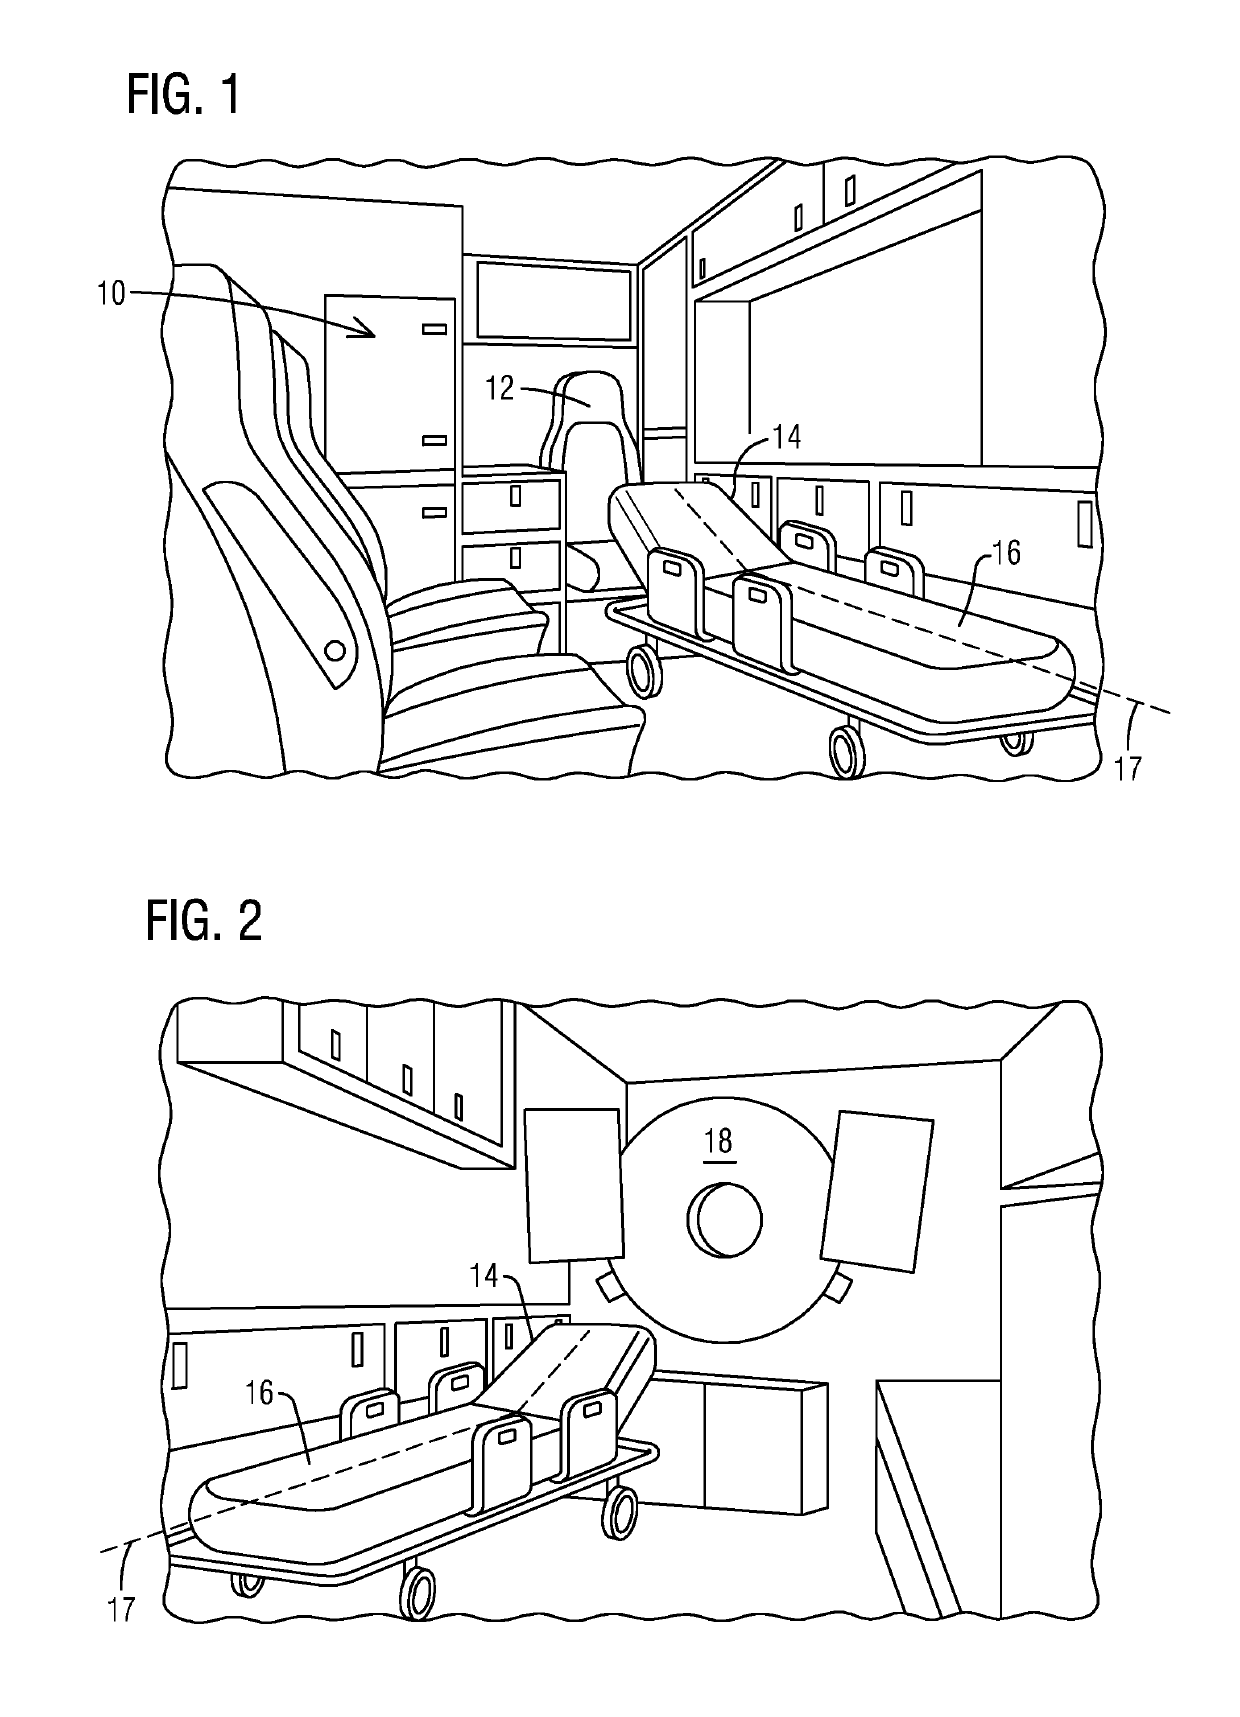 Jumpseat for an emergency transport vehicle